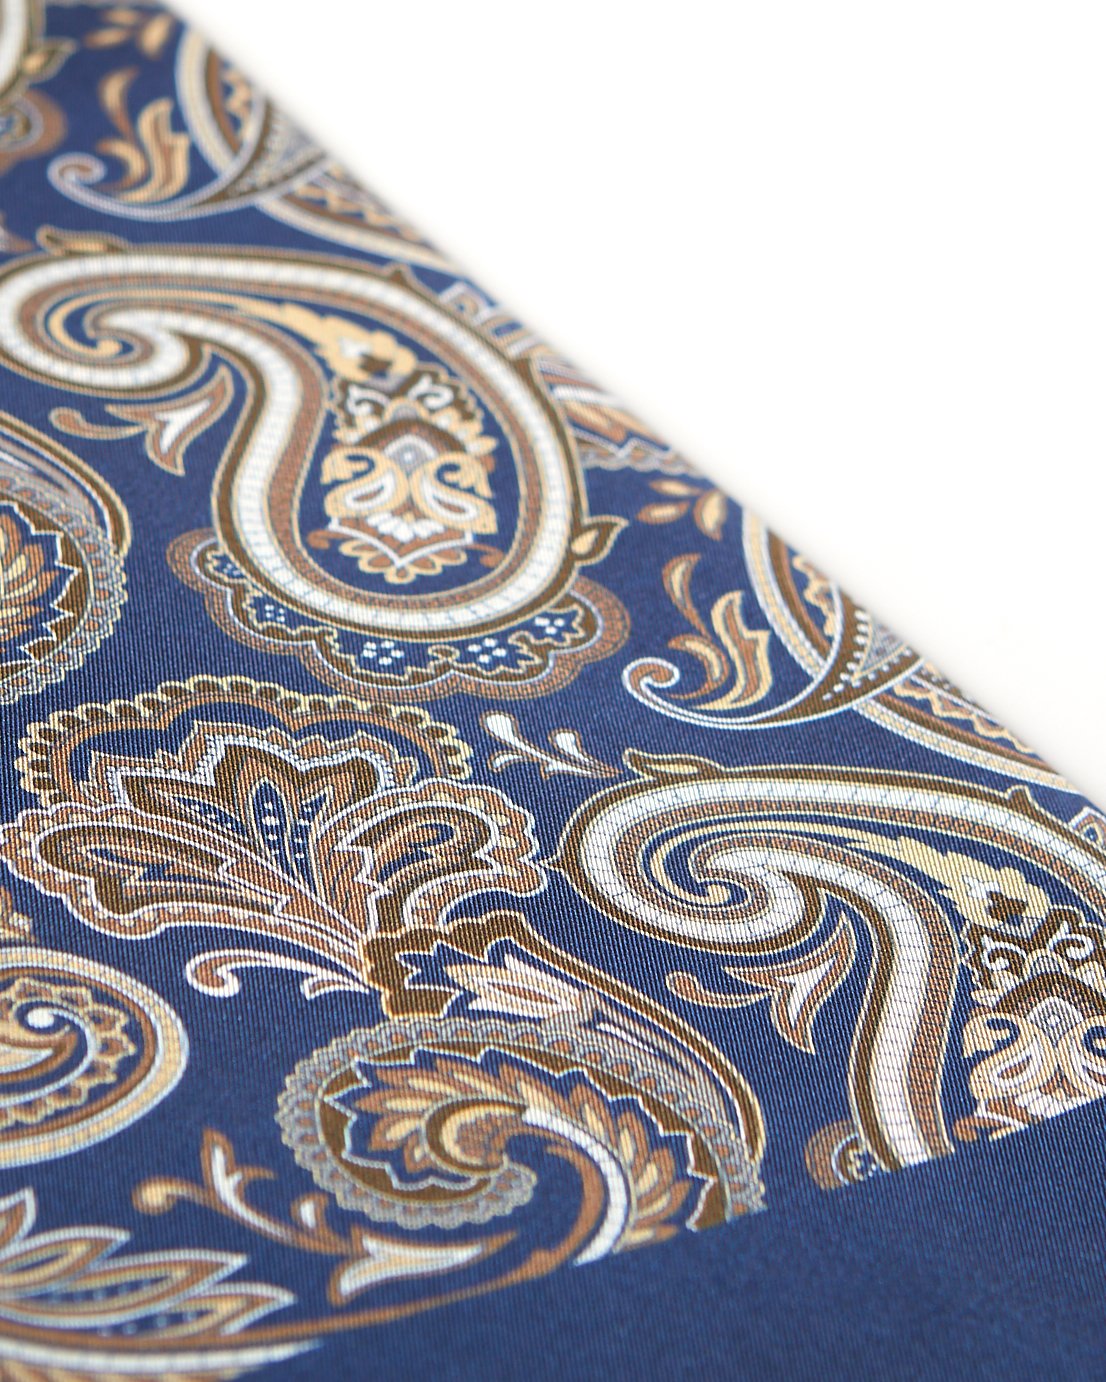 Angled view of the elegant navy blue and gold patterned 100 percent silk scarf, presenting a closer view of the big golden paisley patterns.